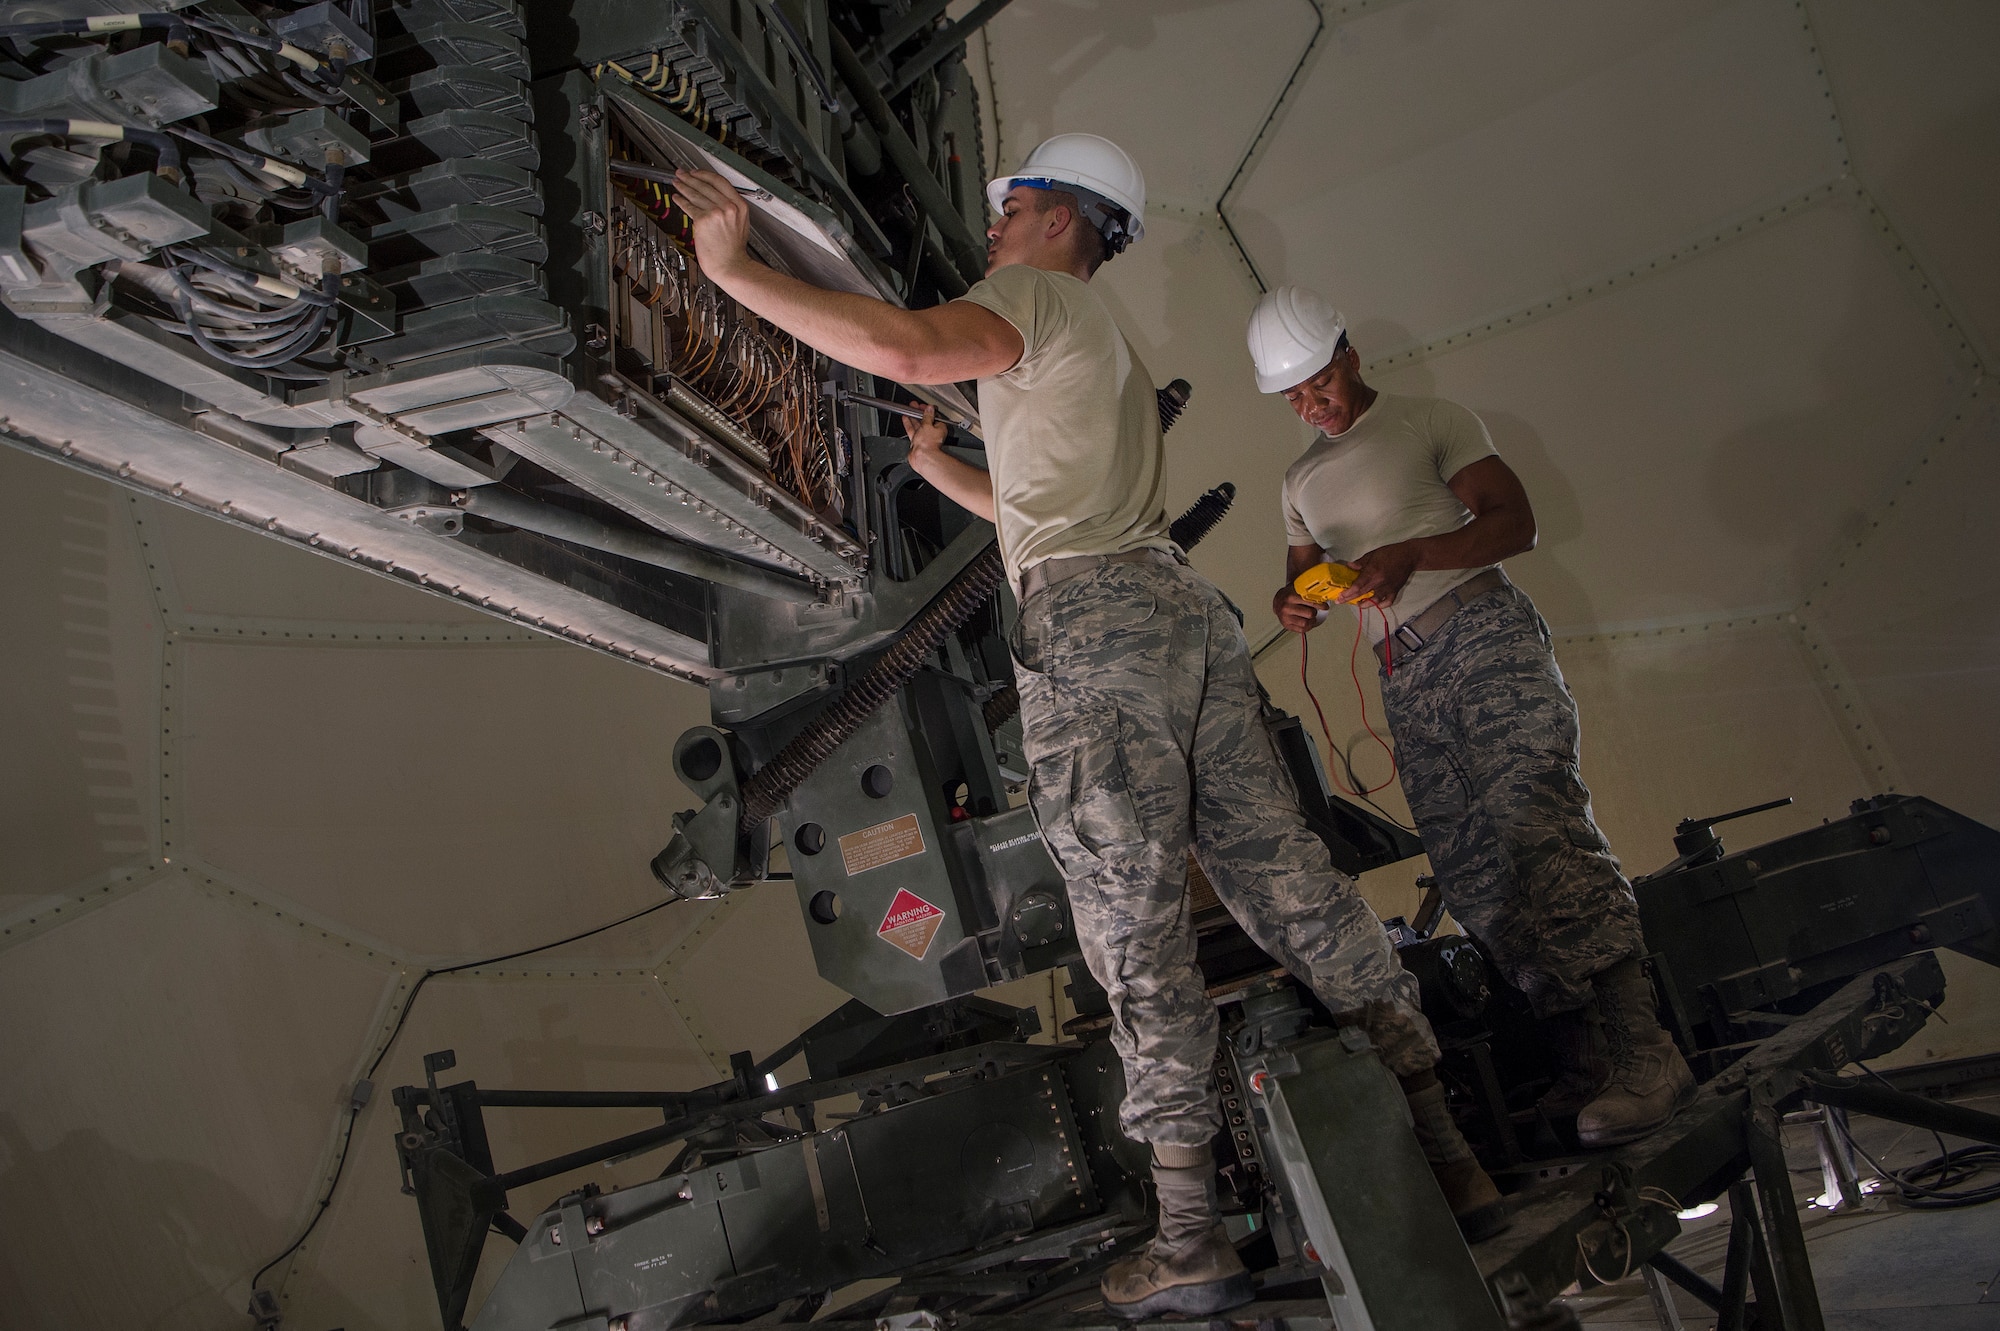 Senior Airman Collin Tully, left, 727th Expeditionary Air Control Squadron, Detachment 3 (EACS DET 3) radar maintainer, and Staff Sgt. Matthew Hawkins, 727th EACS DET 3 radar maintenance NCO in charge, conduct routine maintenance on a transportable radar system (TPS-75) Jan. 14, 2019, at Al Udeid Air Base, Qatar. The 727th EACS consists of a team of 23 Airmen from seven different Air Force Specialty Codes. Together, they ensure TPS-75 radar systems are prepared to identify any aircraft within a 240 nautical mile range of Al Udeid. (U.S. Air Force Tech. Sgt. Christopher Hubenthal)